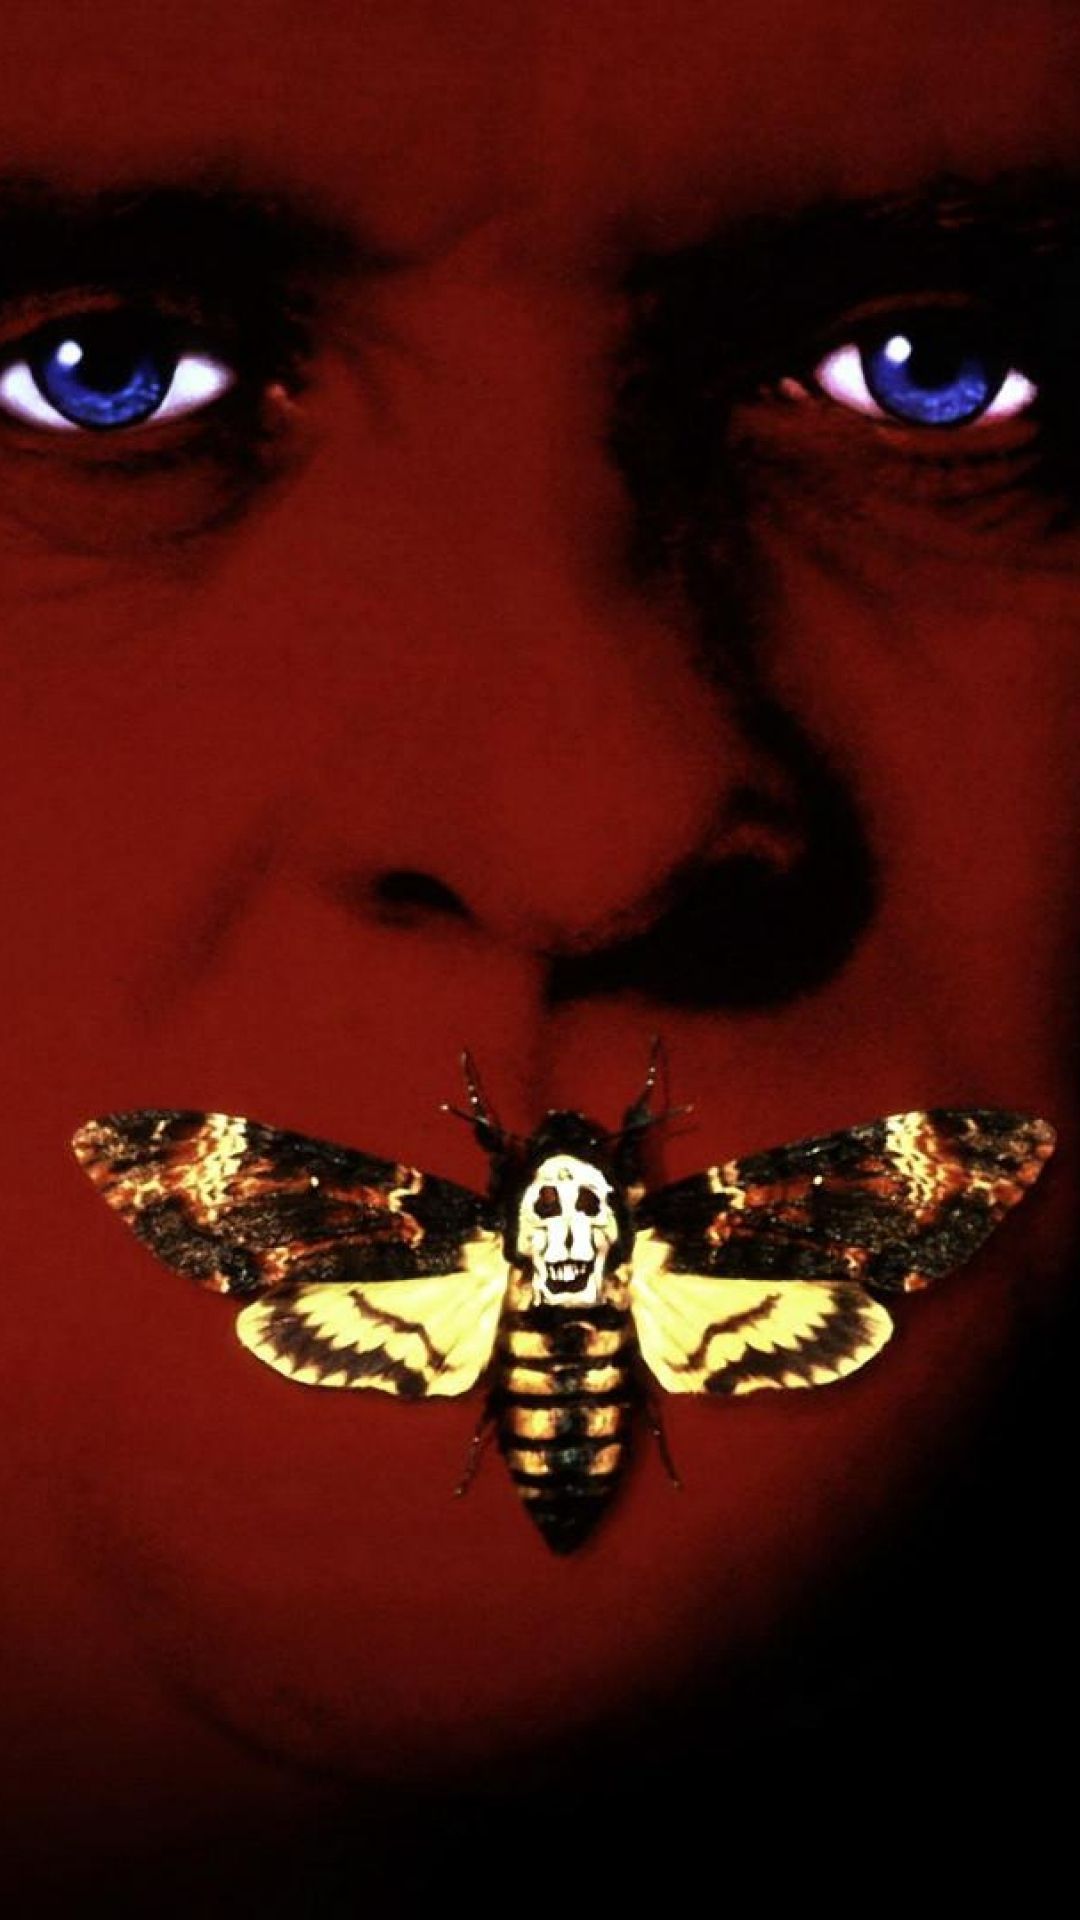 Download Wallpaper 1080x1920 The silence of the lambs, Butterflies